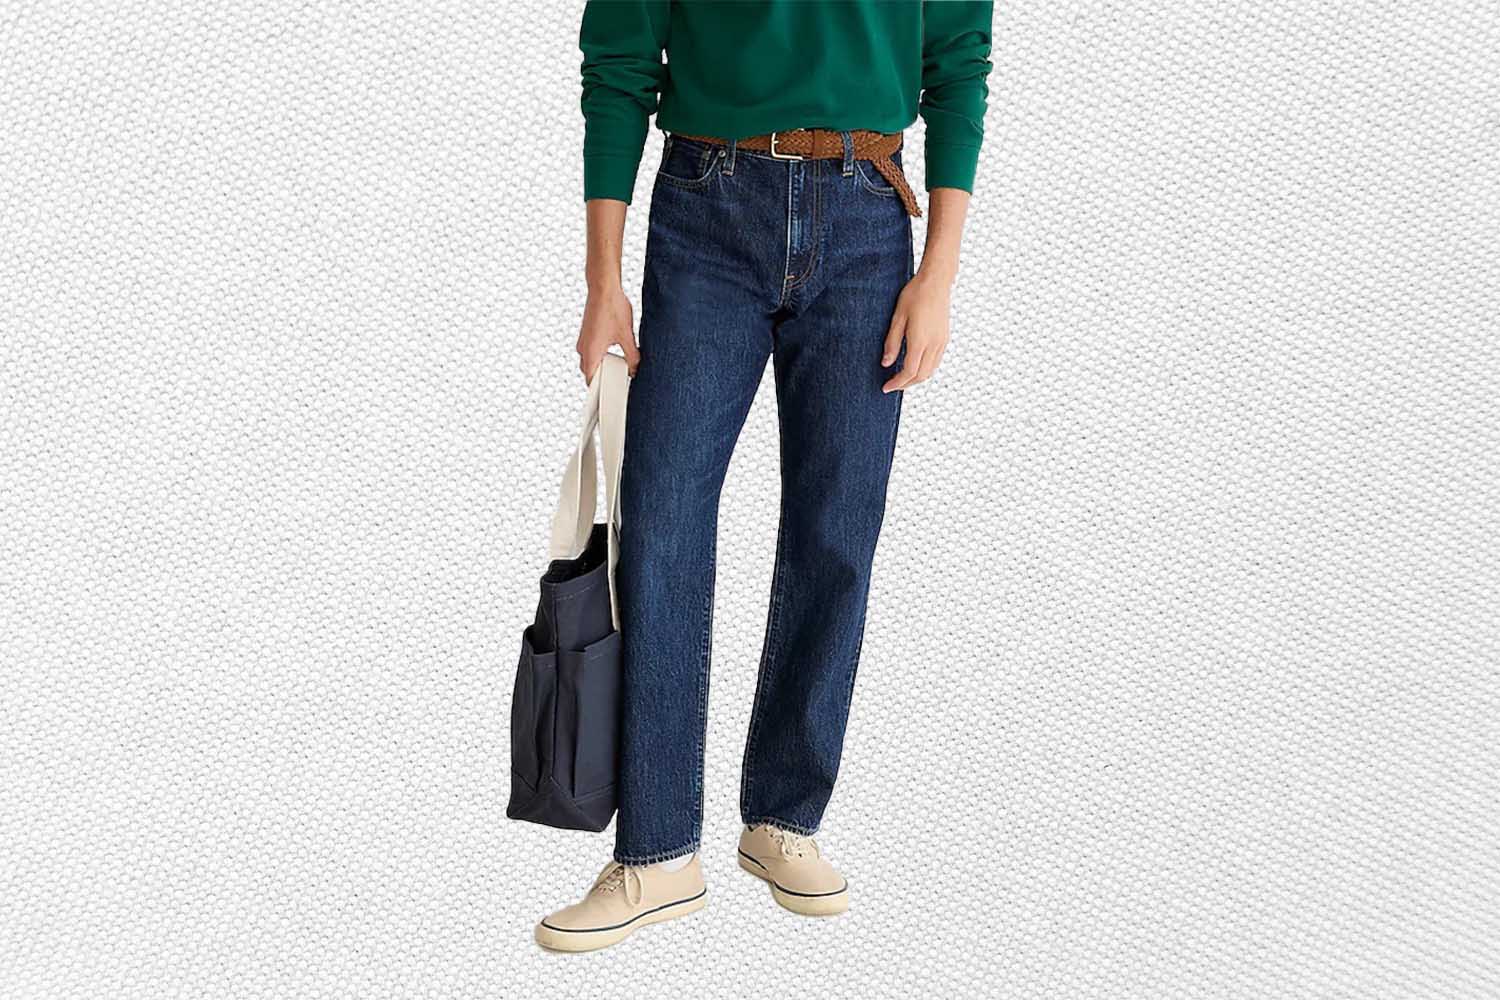 a model in a pair of dark jeans from J.Crew on a grey background